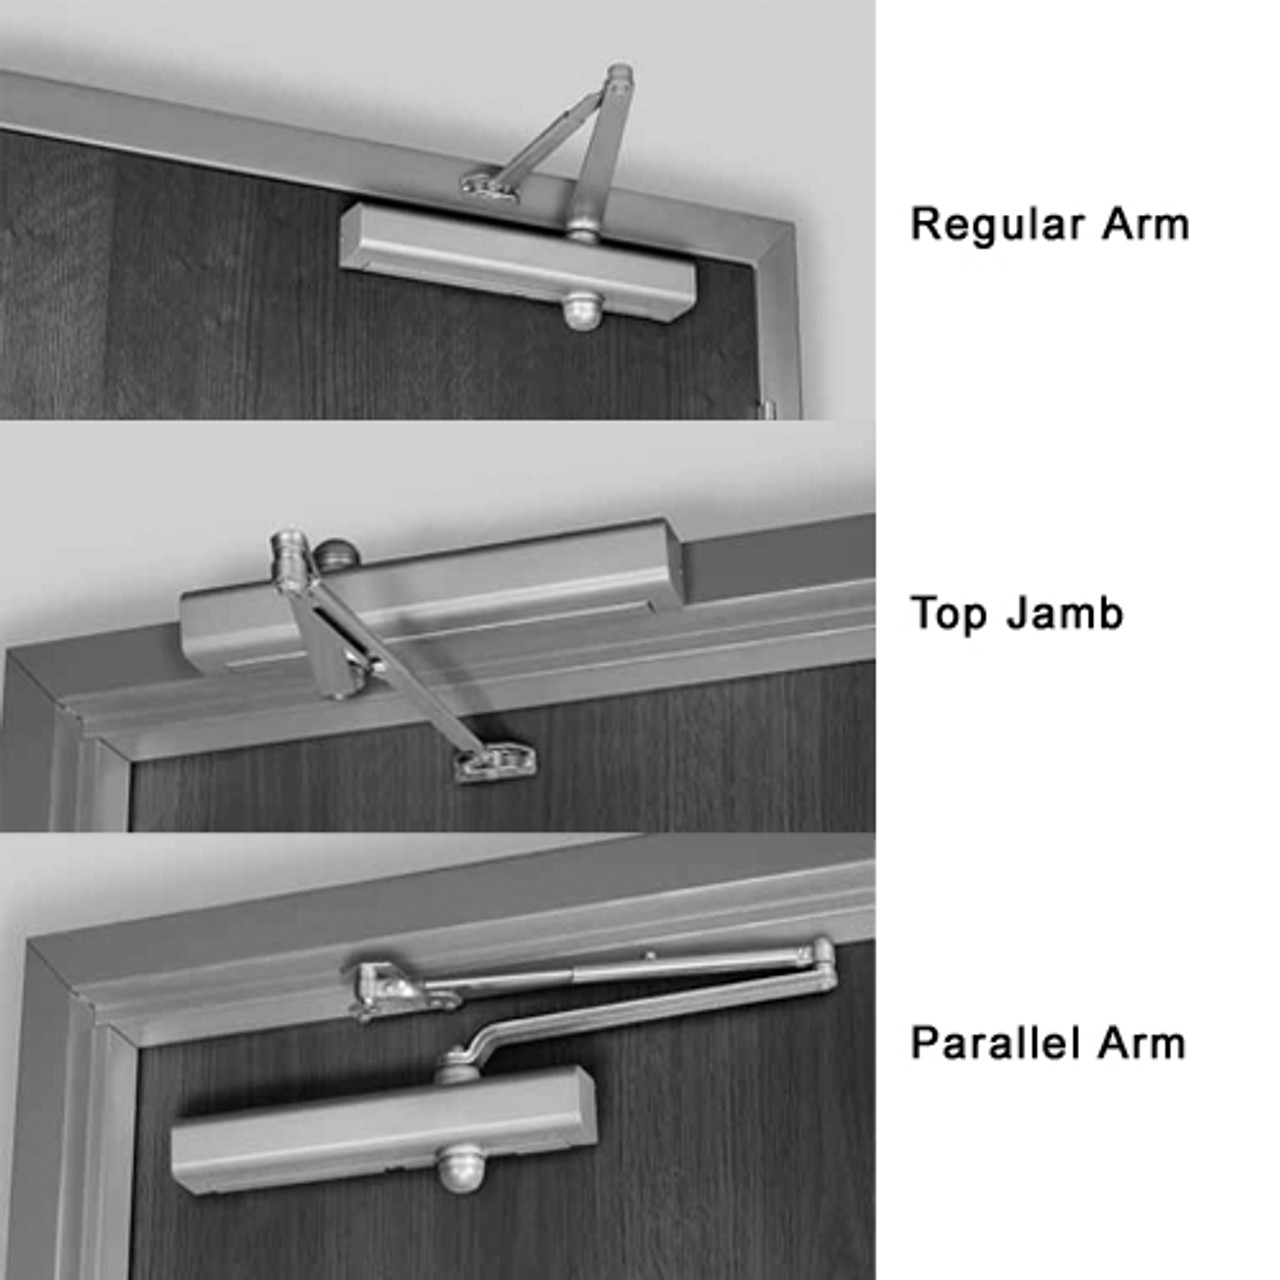 8501H-691 Norton 8000 Series Full Cover Hold Open Door Closers with Regular Parallel and Top Jamb to 2-3/4 inch Reveal in Dull Bronze Finish